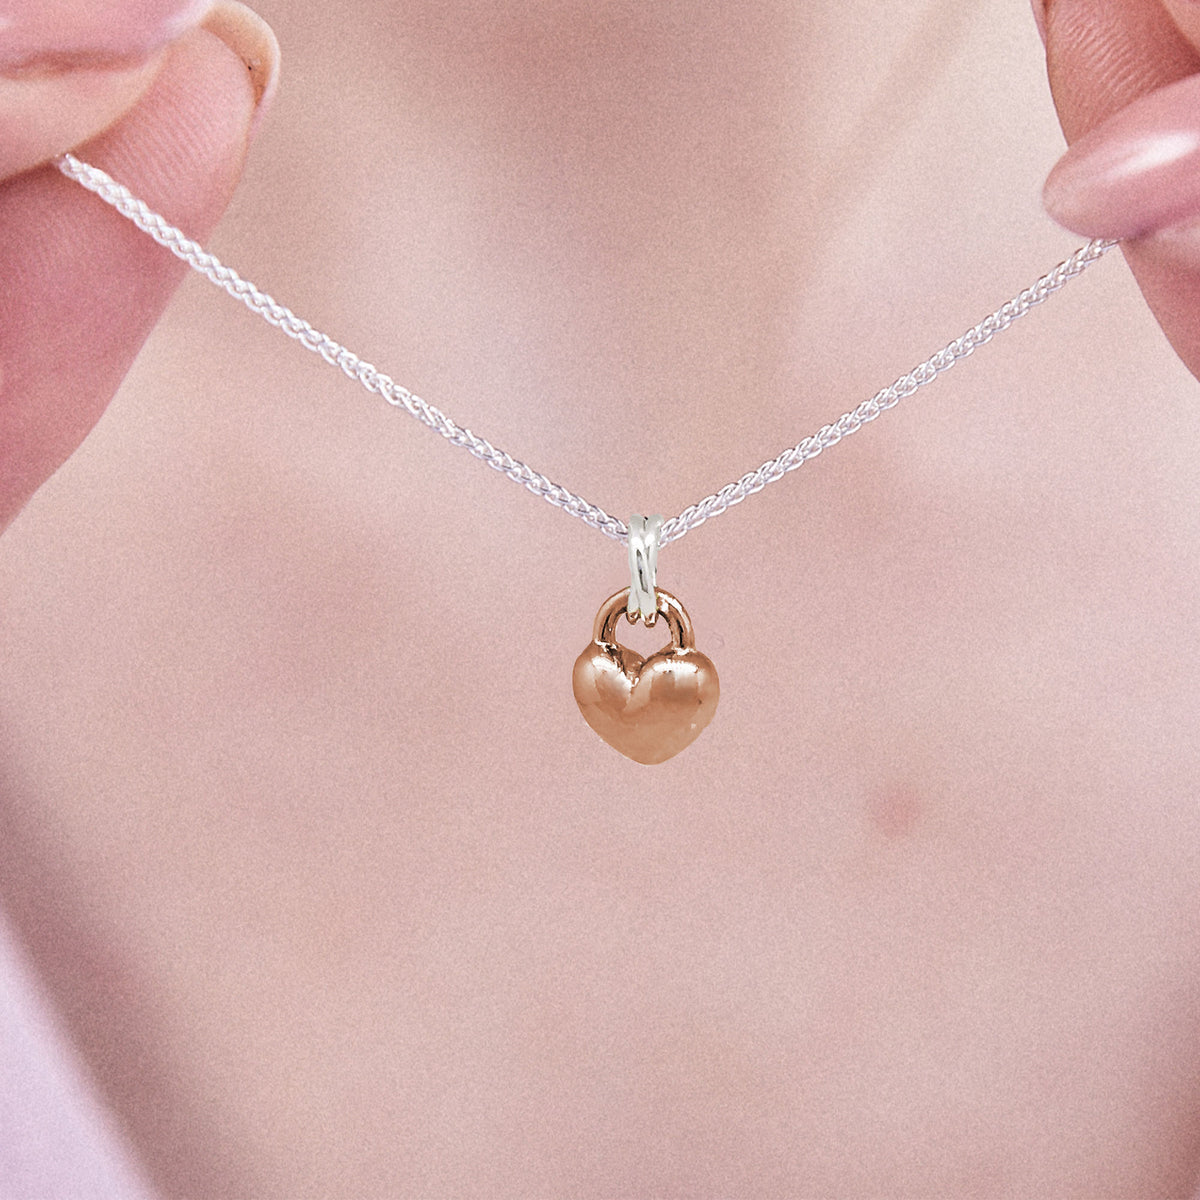 solid rose gold and silver love heart pendant necklace romantic anniversary gift for girlfriend wife